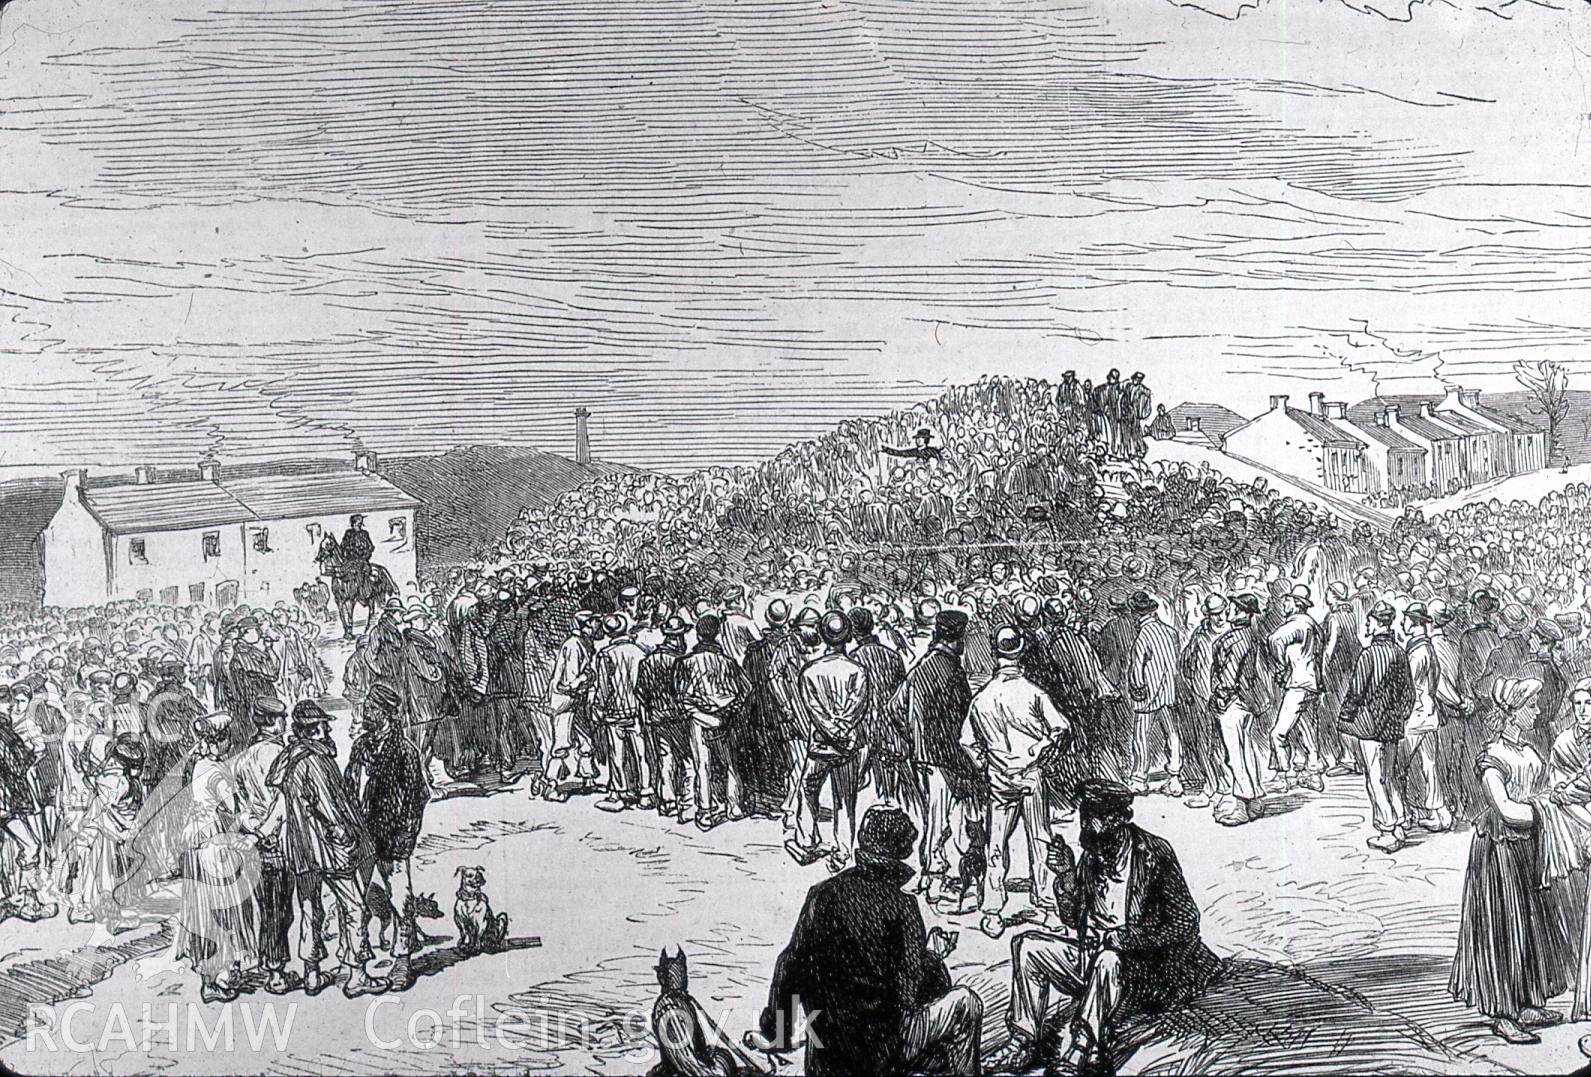 Digital copy of etching from London Illustrated News entitled: 'Mass Meeting of the locked-out at Mountain Hare, Merthyr Tydfil', dated 1875.